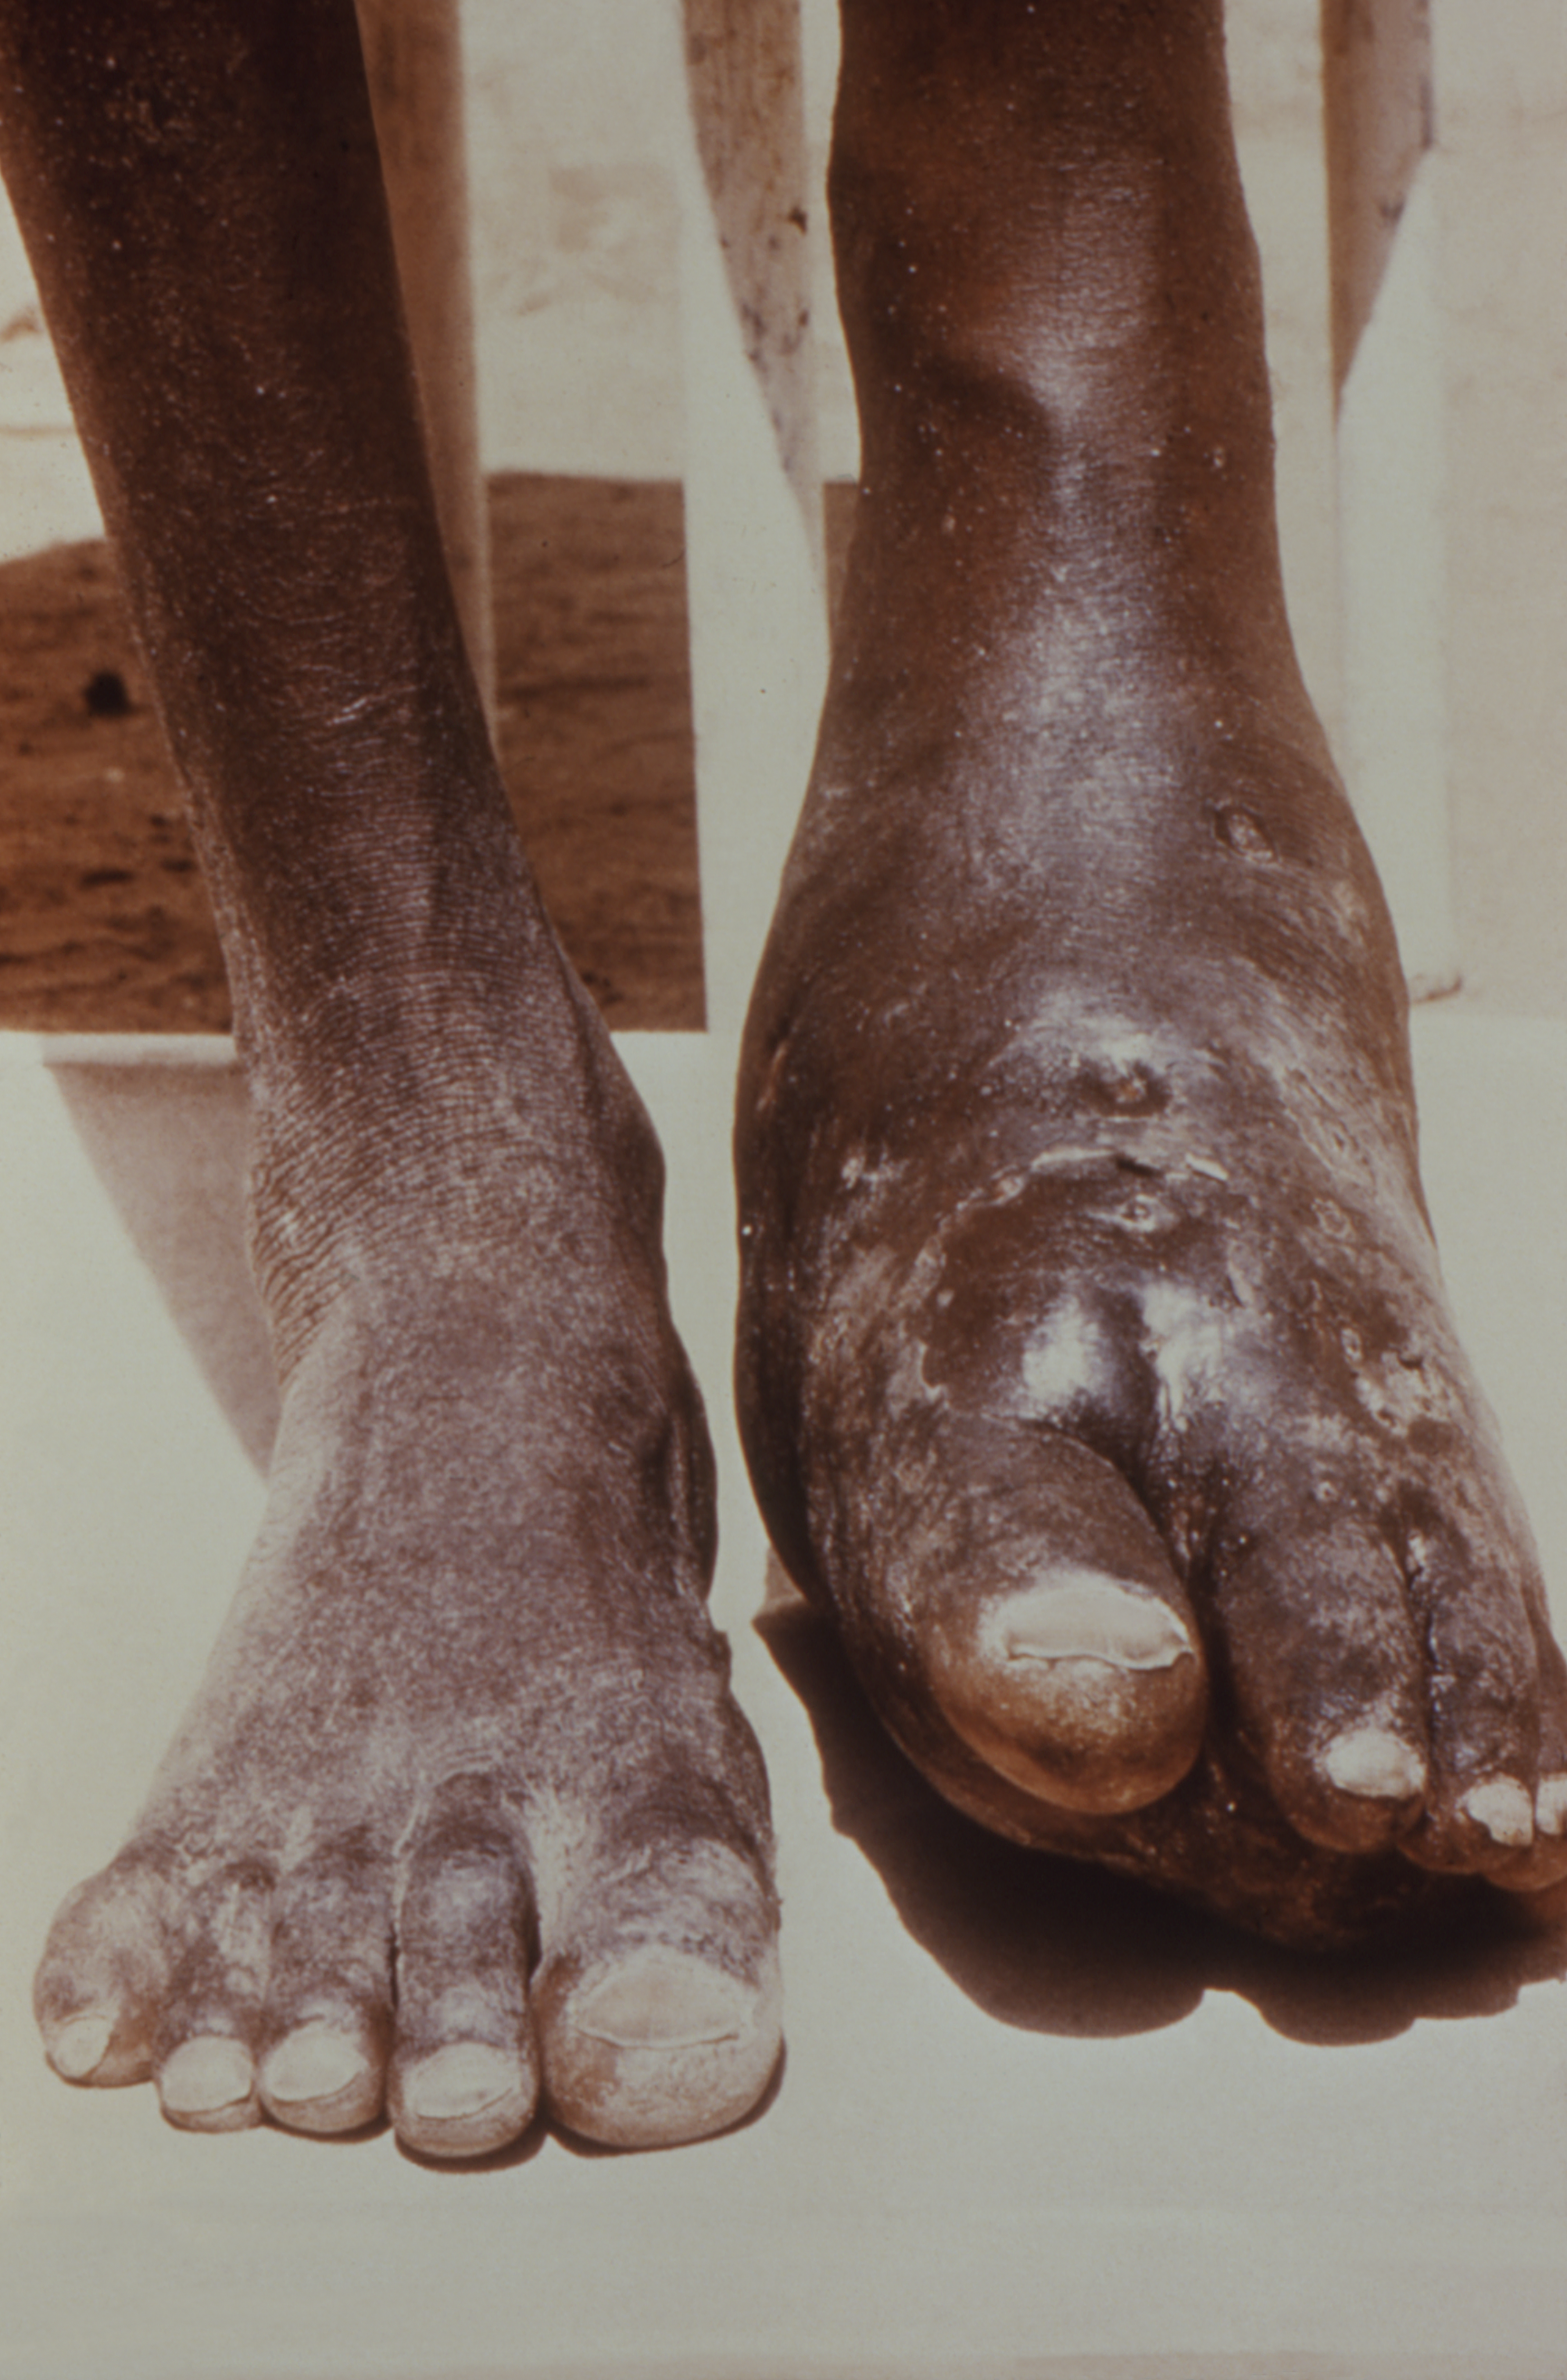 This image depicts the feet, ankles, and lower legs of a patient, who had presented with an infection known as nocardiosis, a form of actinomycosis, due to the bacterium, Nocardia somaliensis, which had affected the left foot and ankle, causing severe swelling and deformation of the normal structural contours